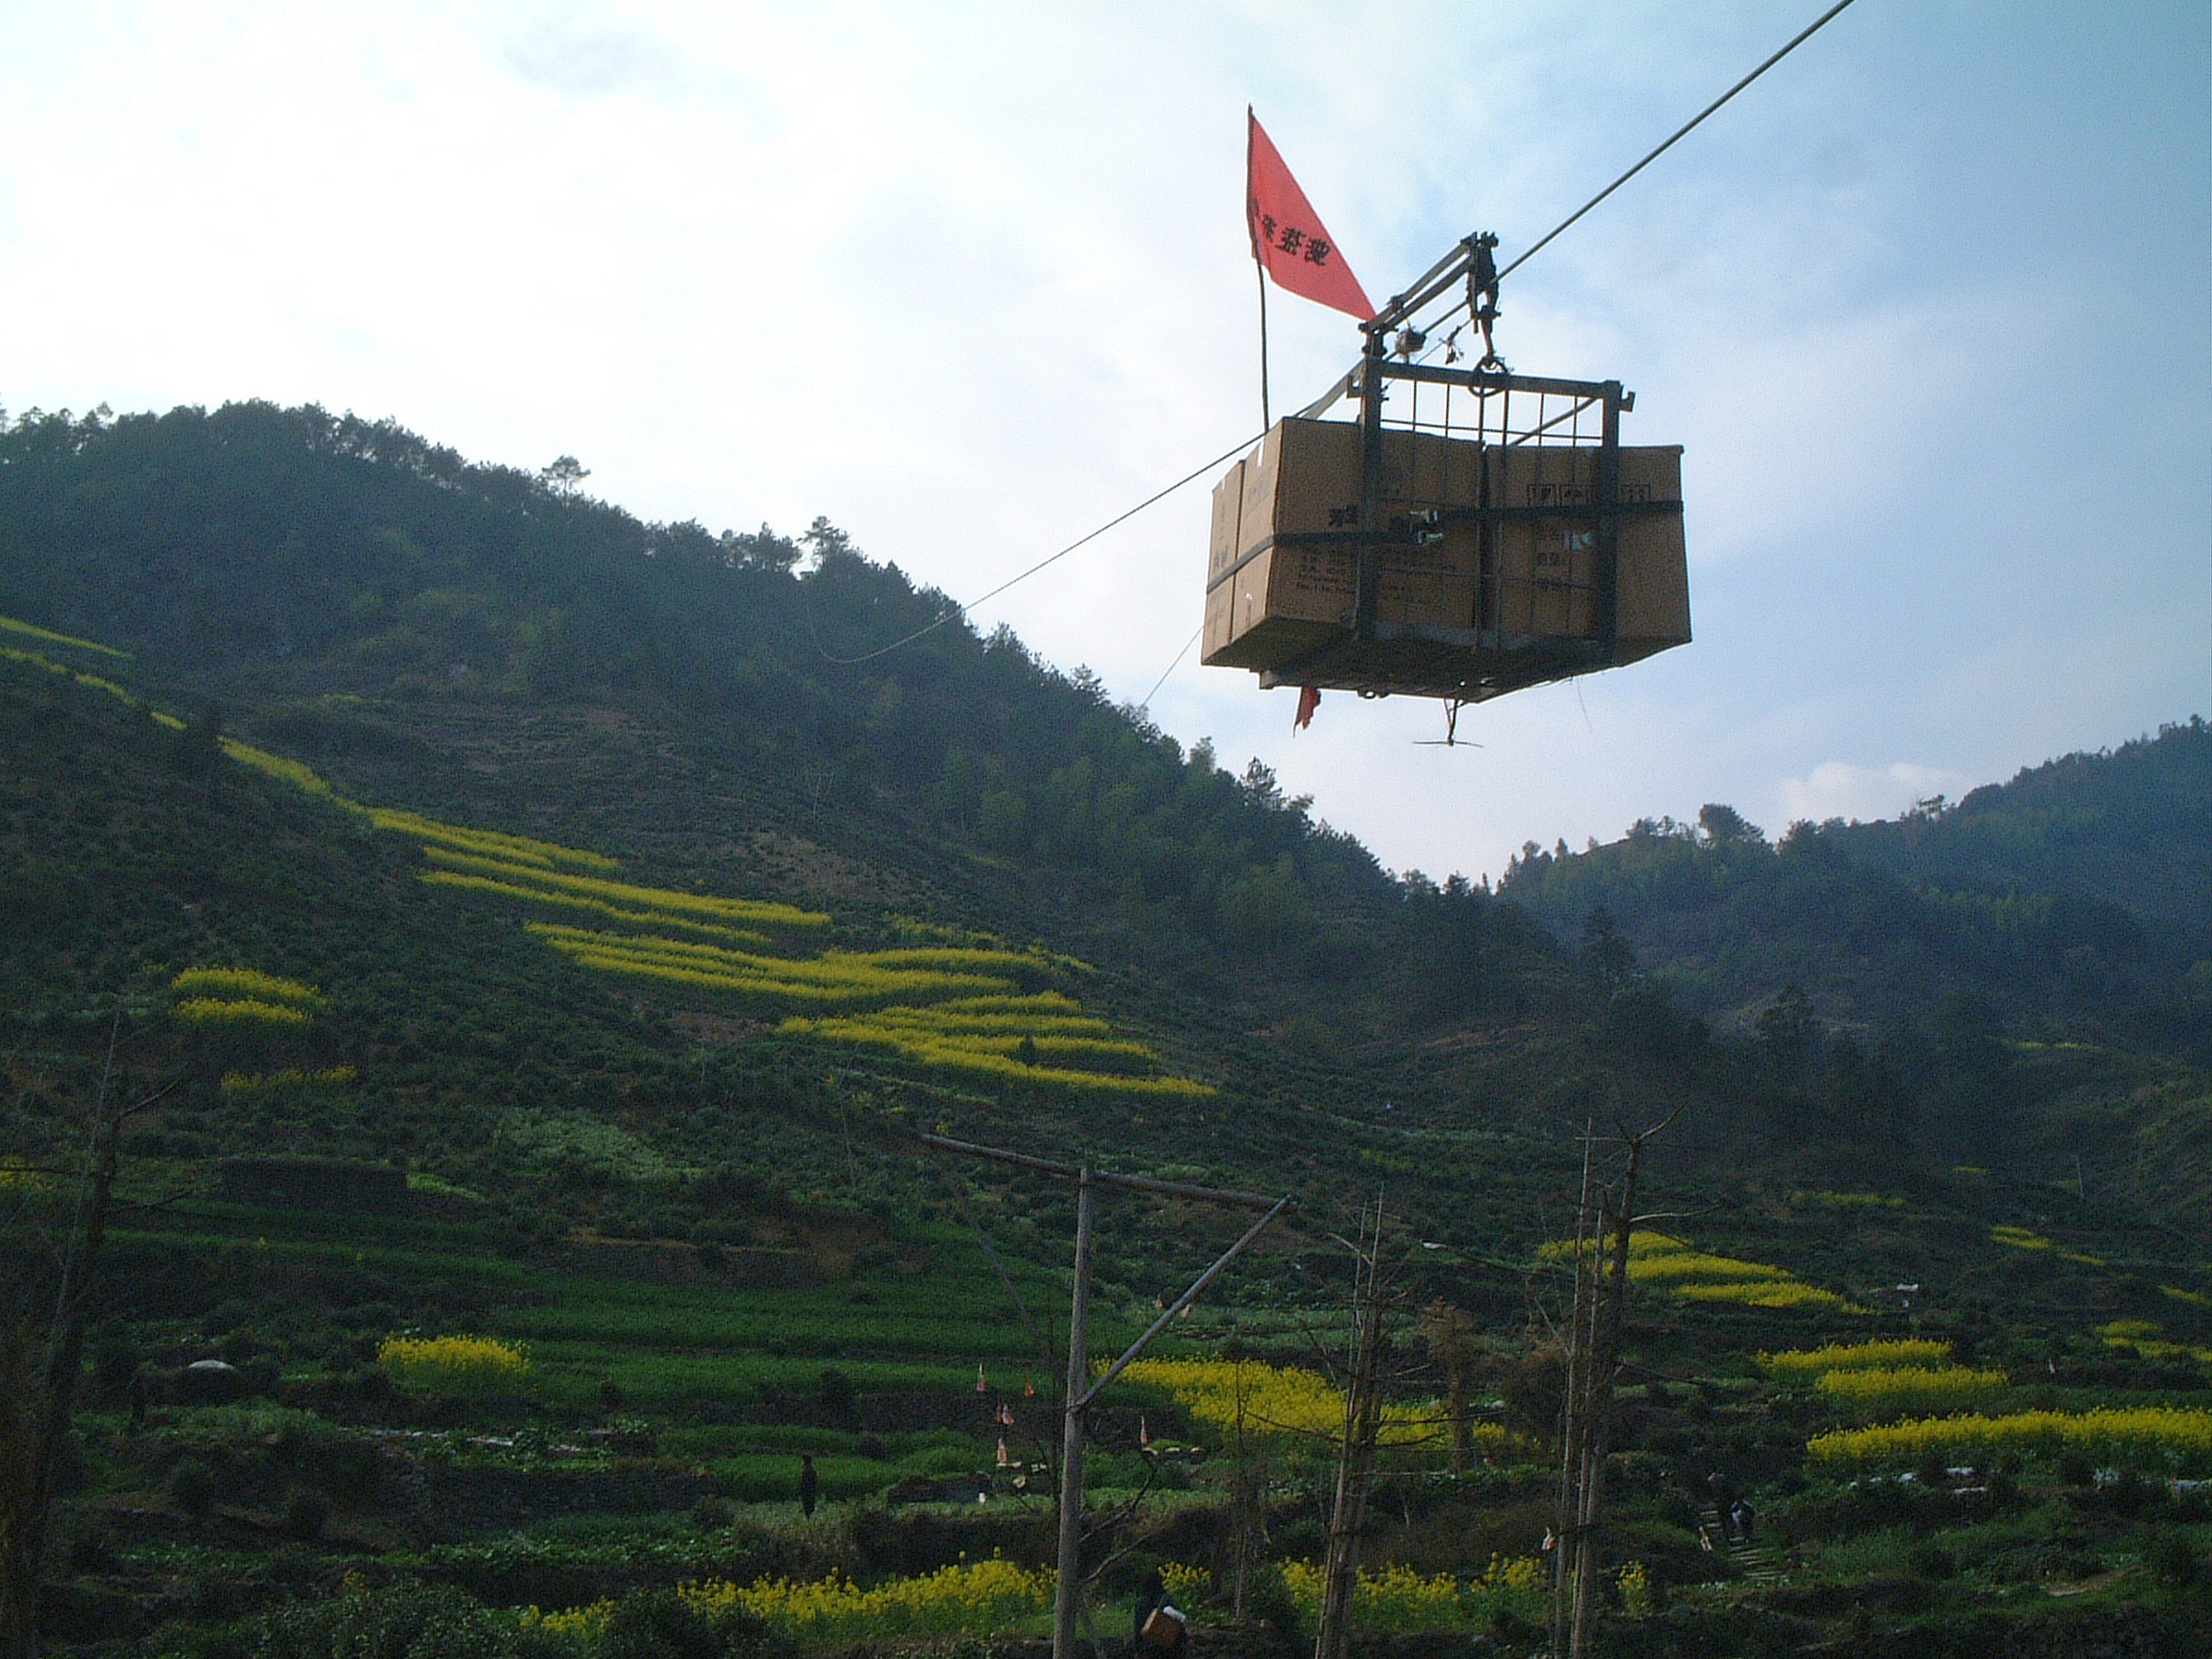 A cable line stretching over a mountainside covered in tea terraces in Huangshan, bearing a load of boxes marked with a red flag.